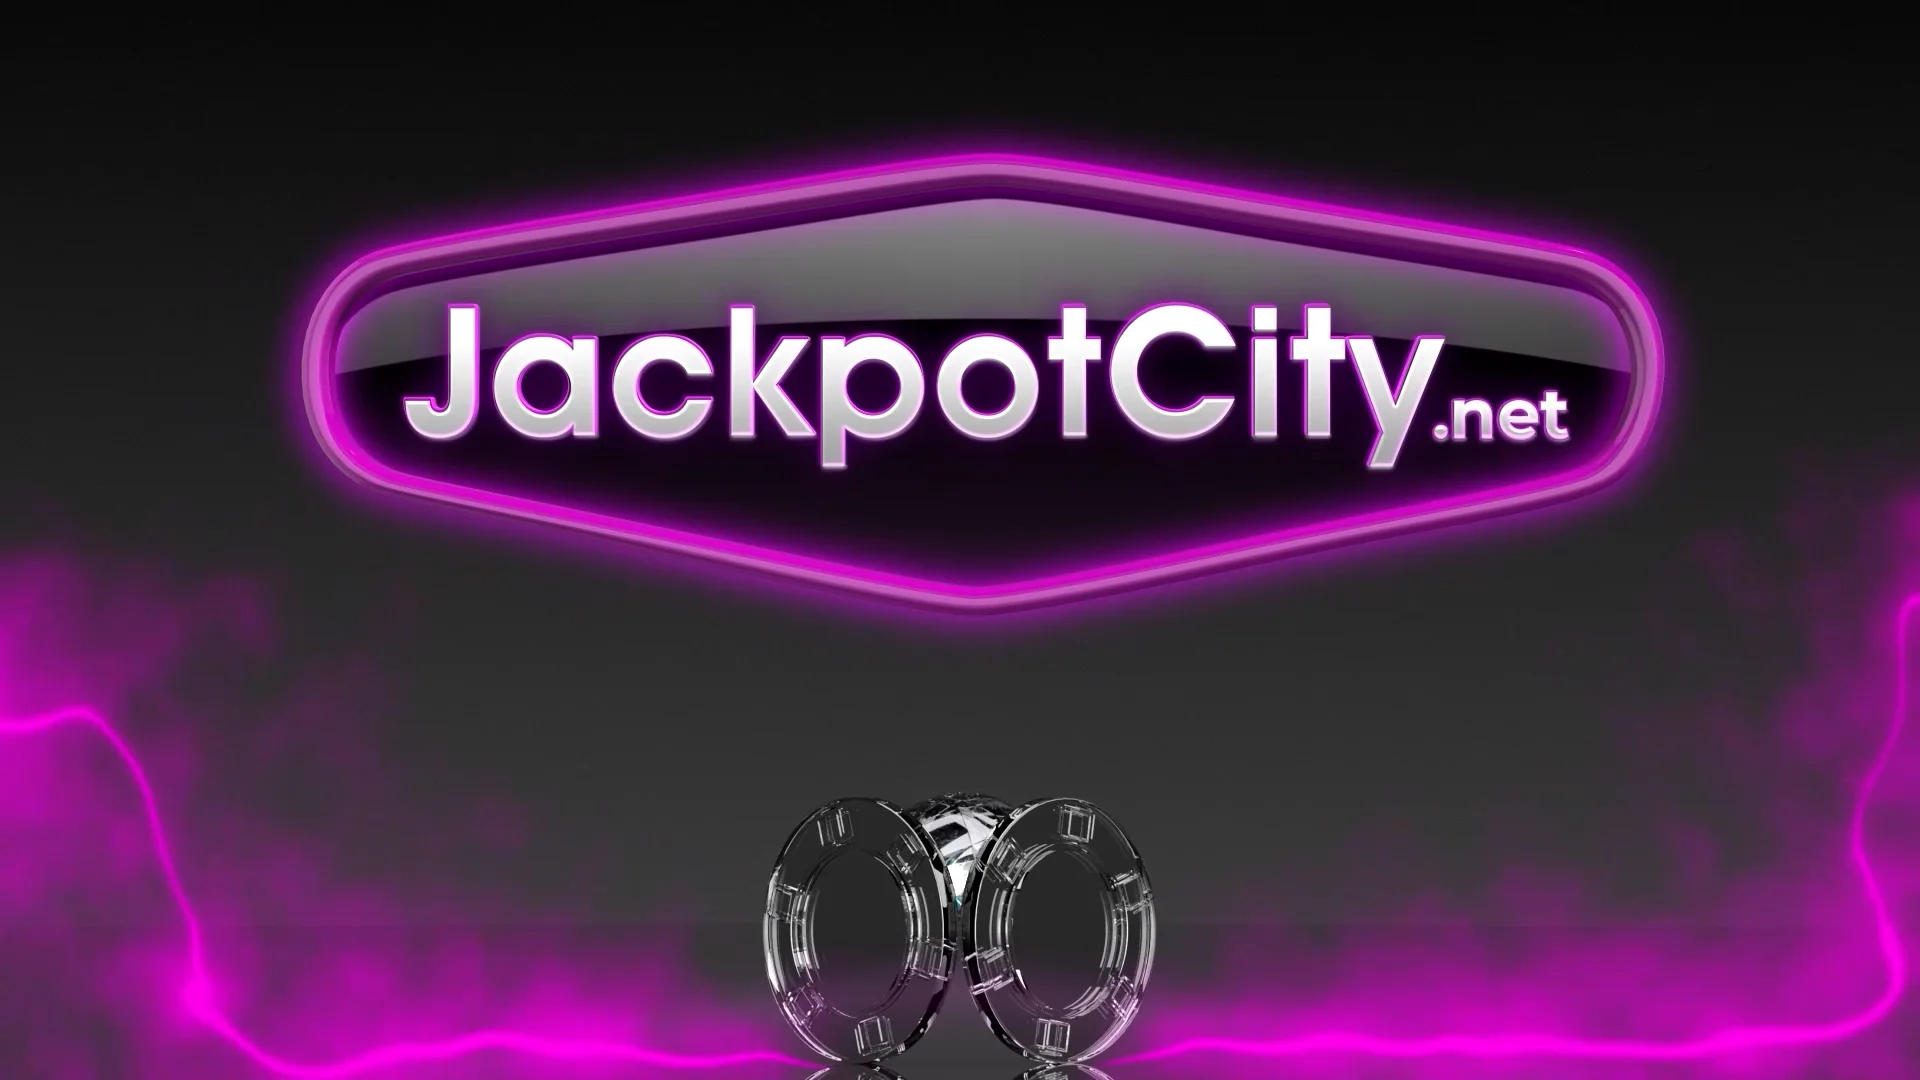 jackpotcity net sign in